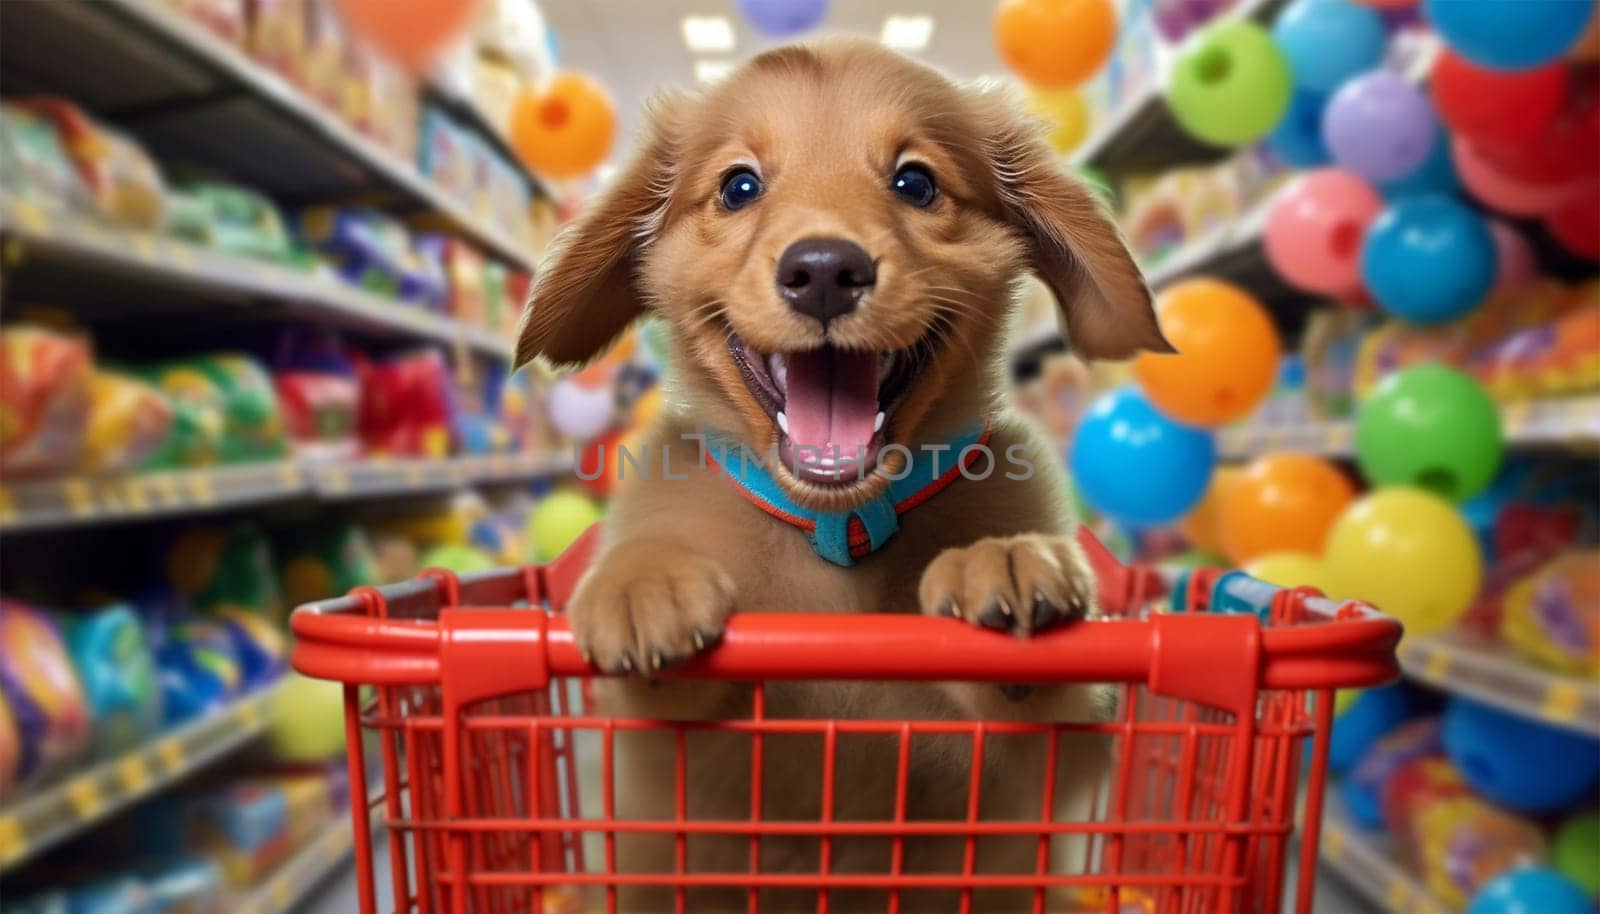 Cute funny dog in grocery store shopping in supermarket. puppy dog sitting in a shopping cart on blurred shop mall background. Concept for animal pets groceries,delivery,shopping background cute